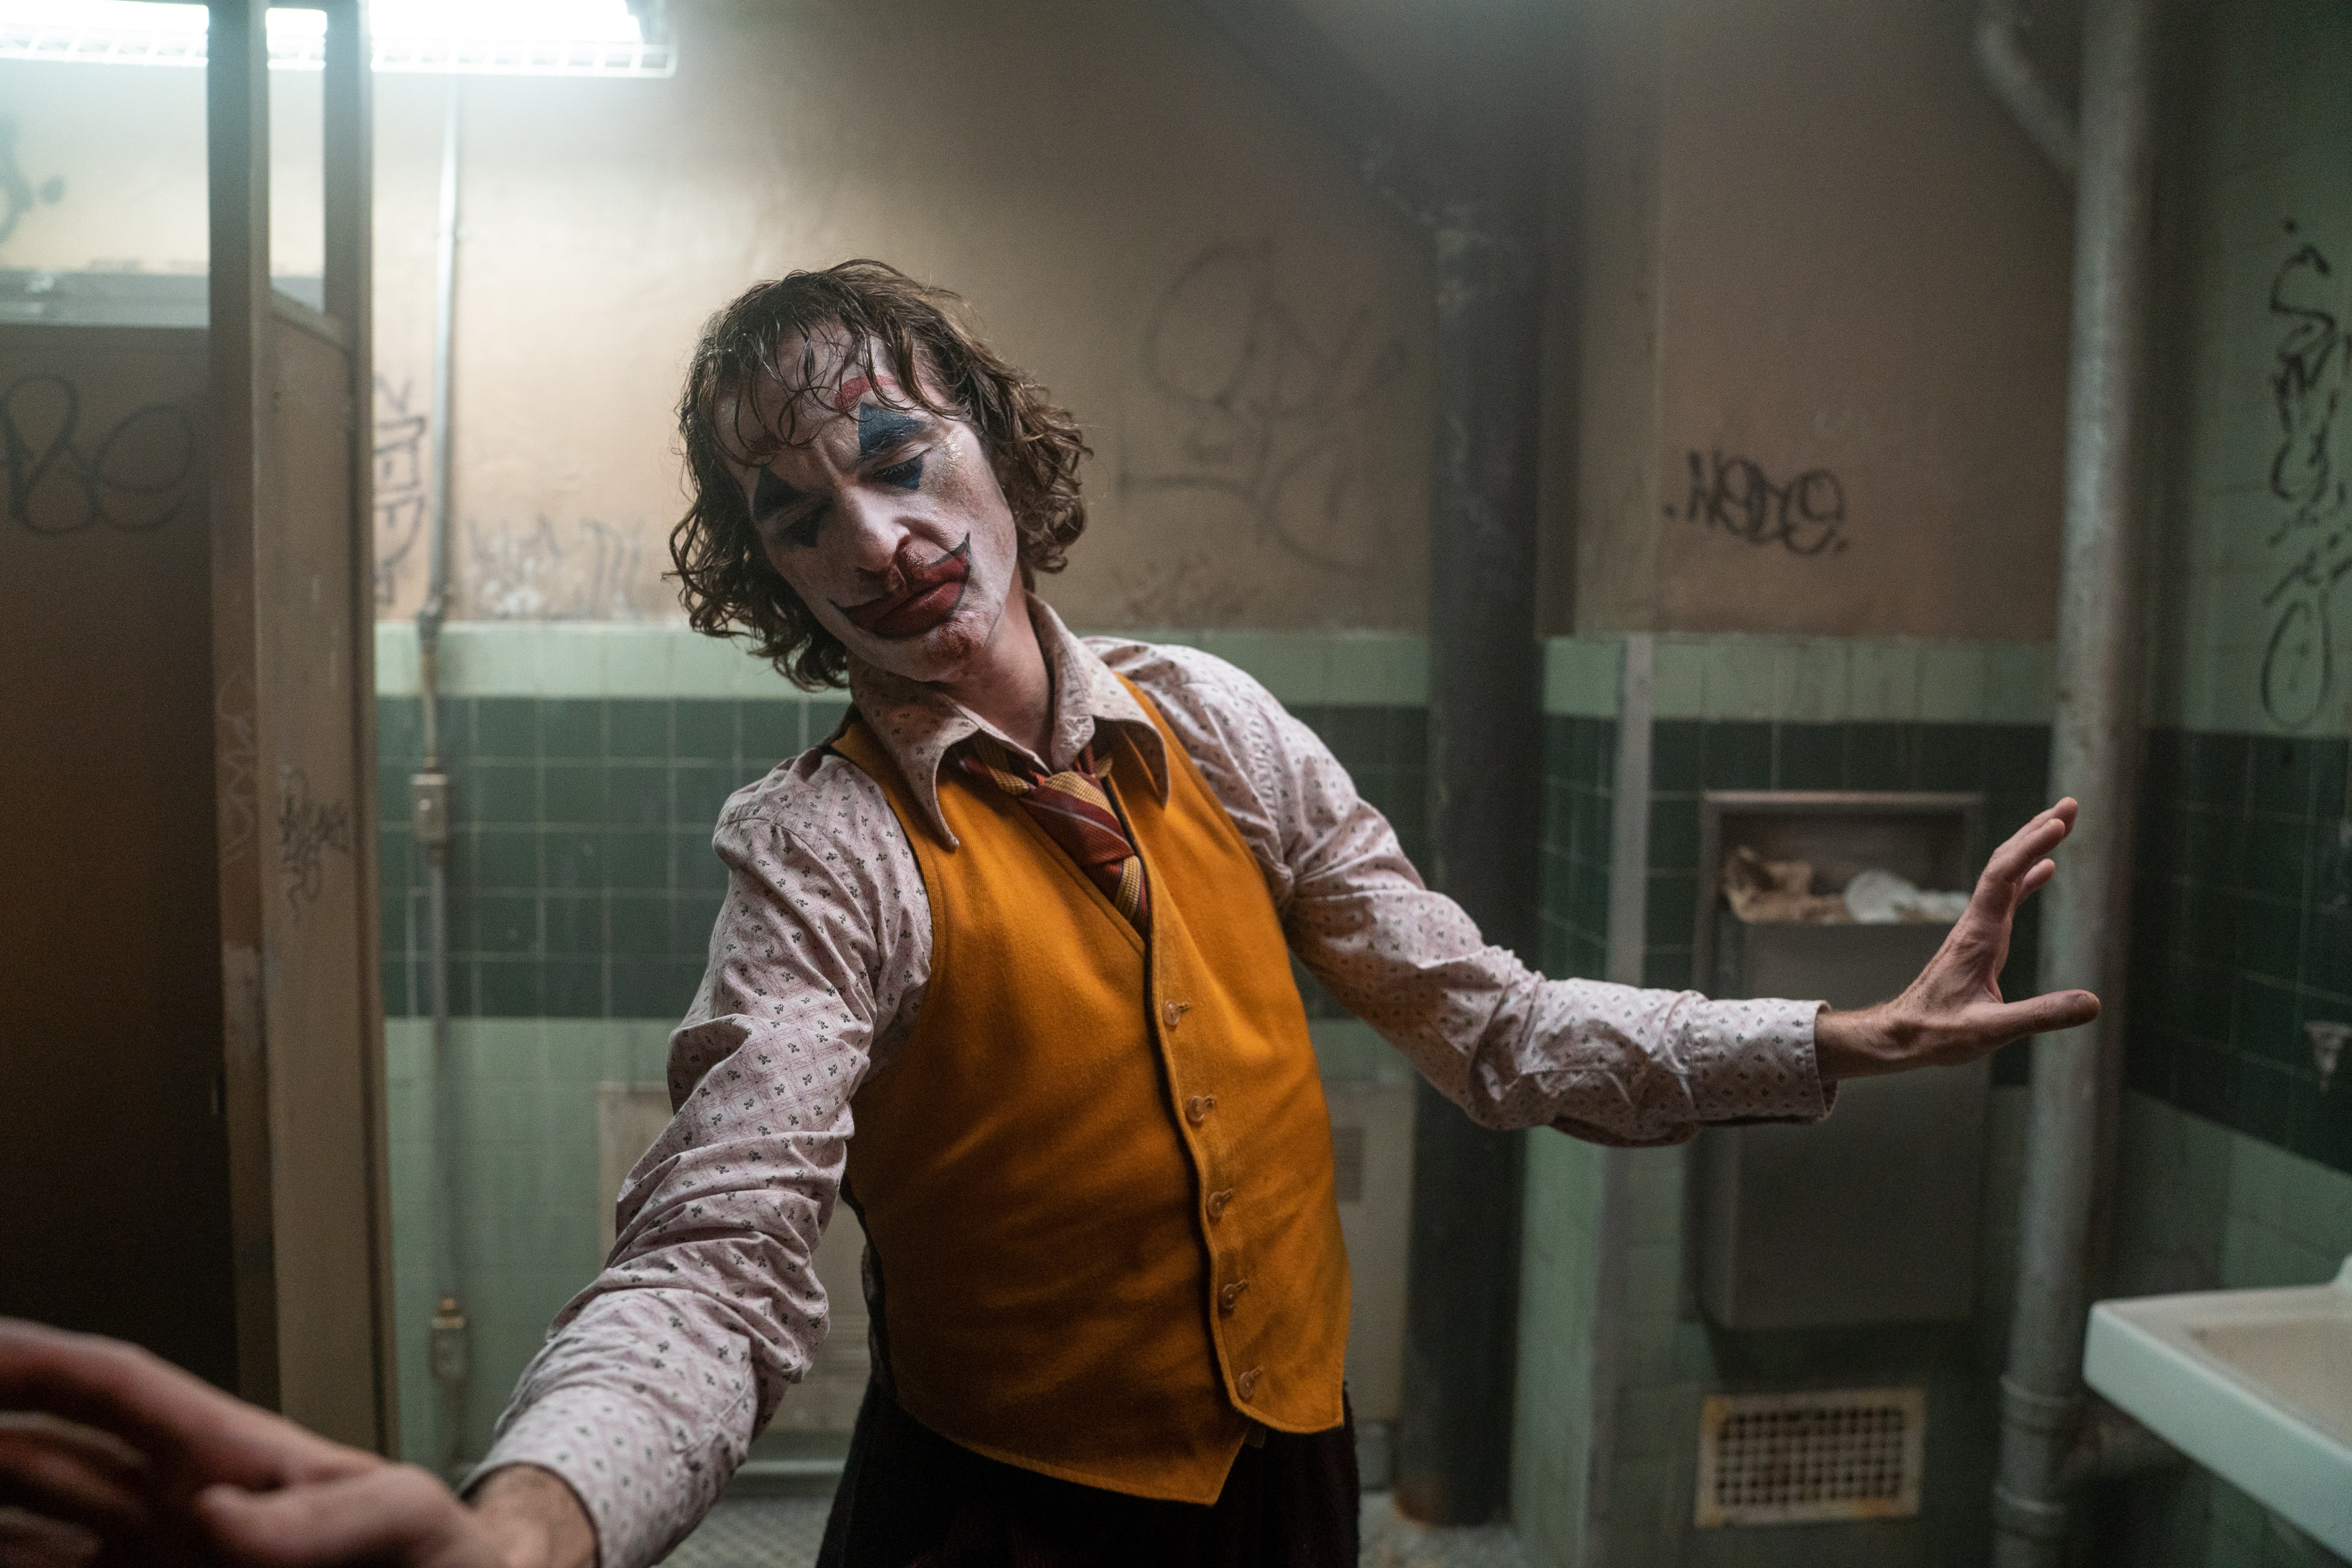 EXCLUSIVE: Joker Director Todd Phillips REVEALS why he wanted to make a film on Arthur Fleck's origin